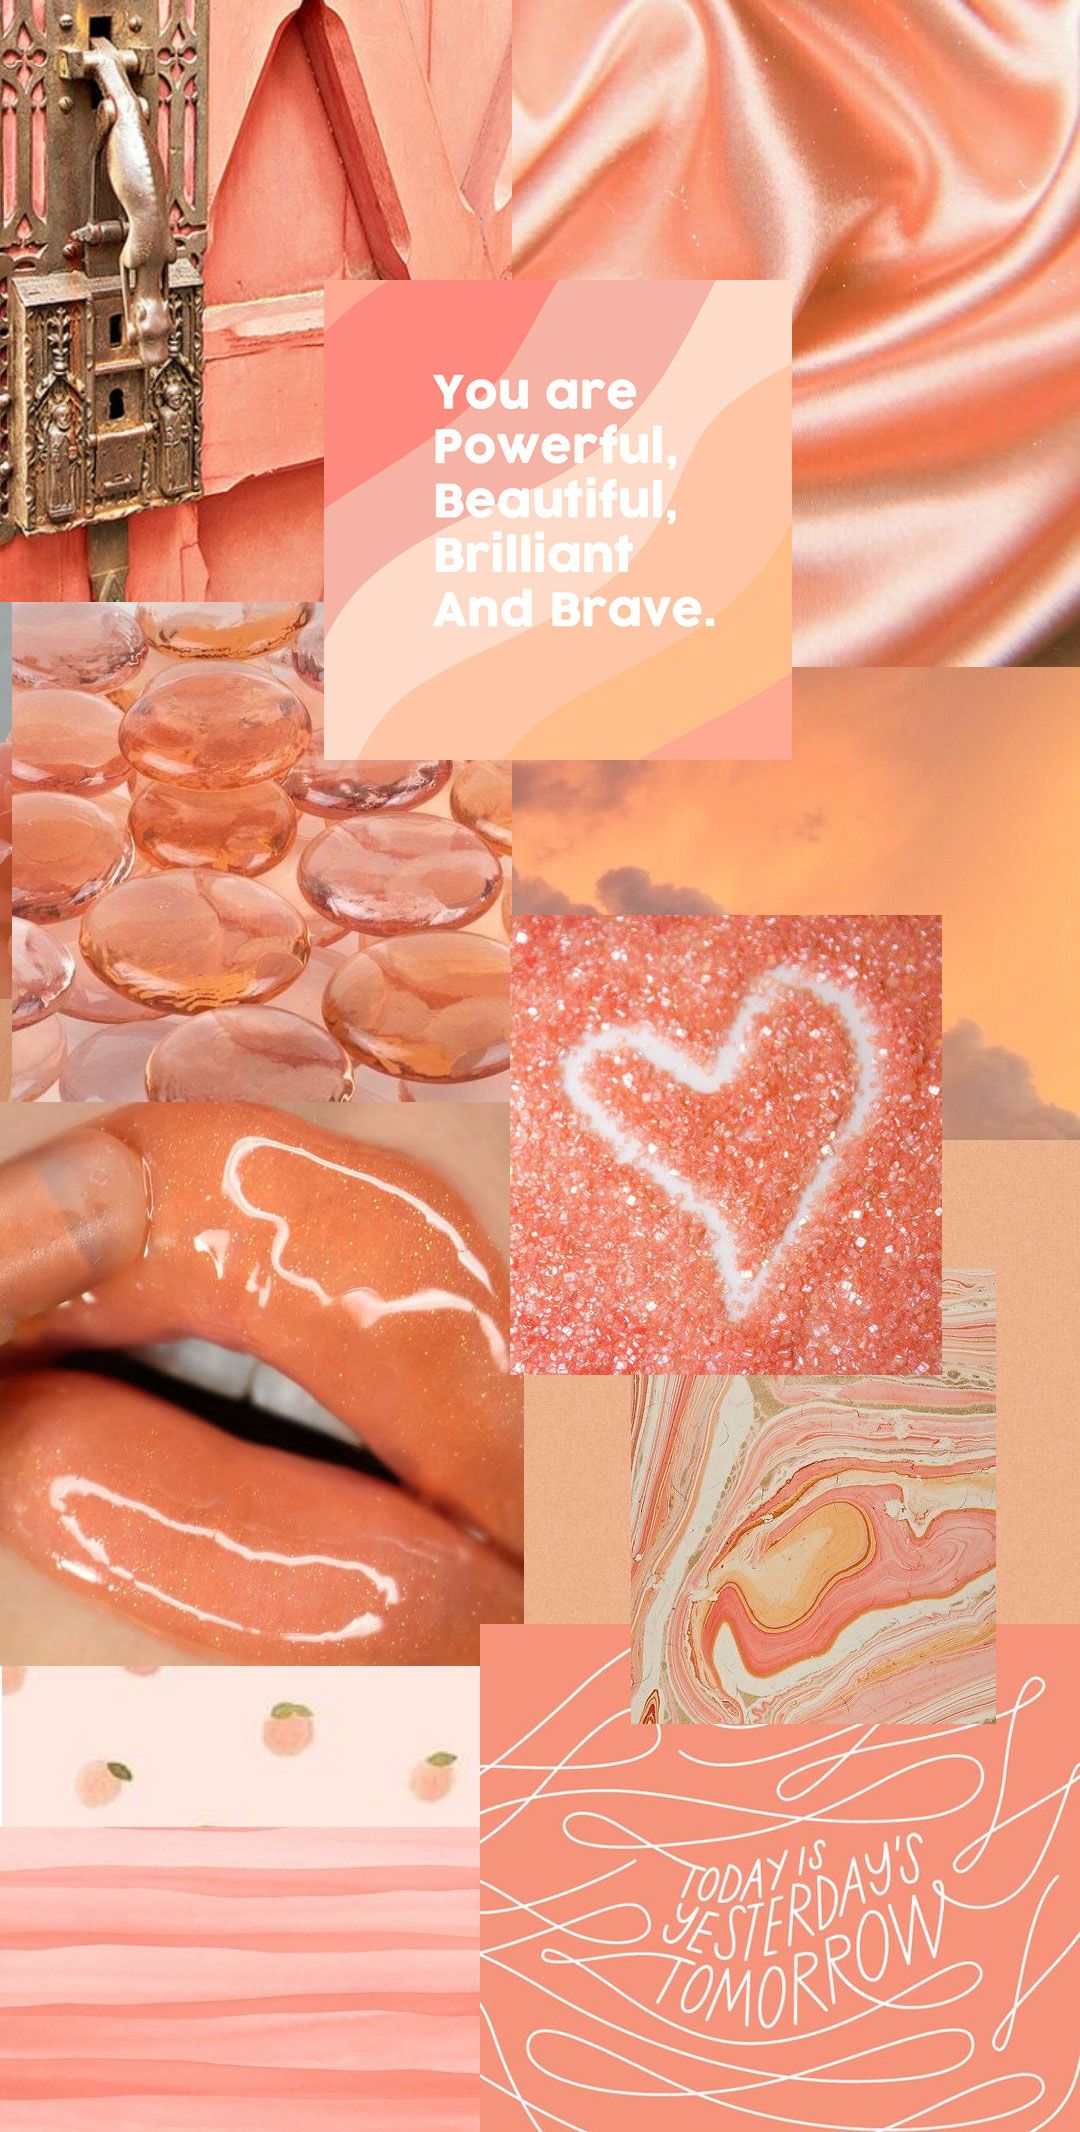 Aesthetic phone background in pink and orange with a motivational quote. - Peach